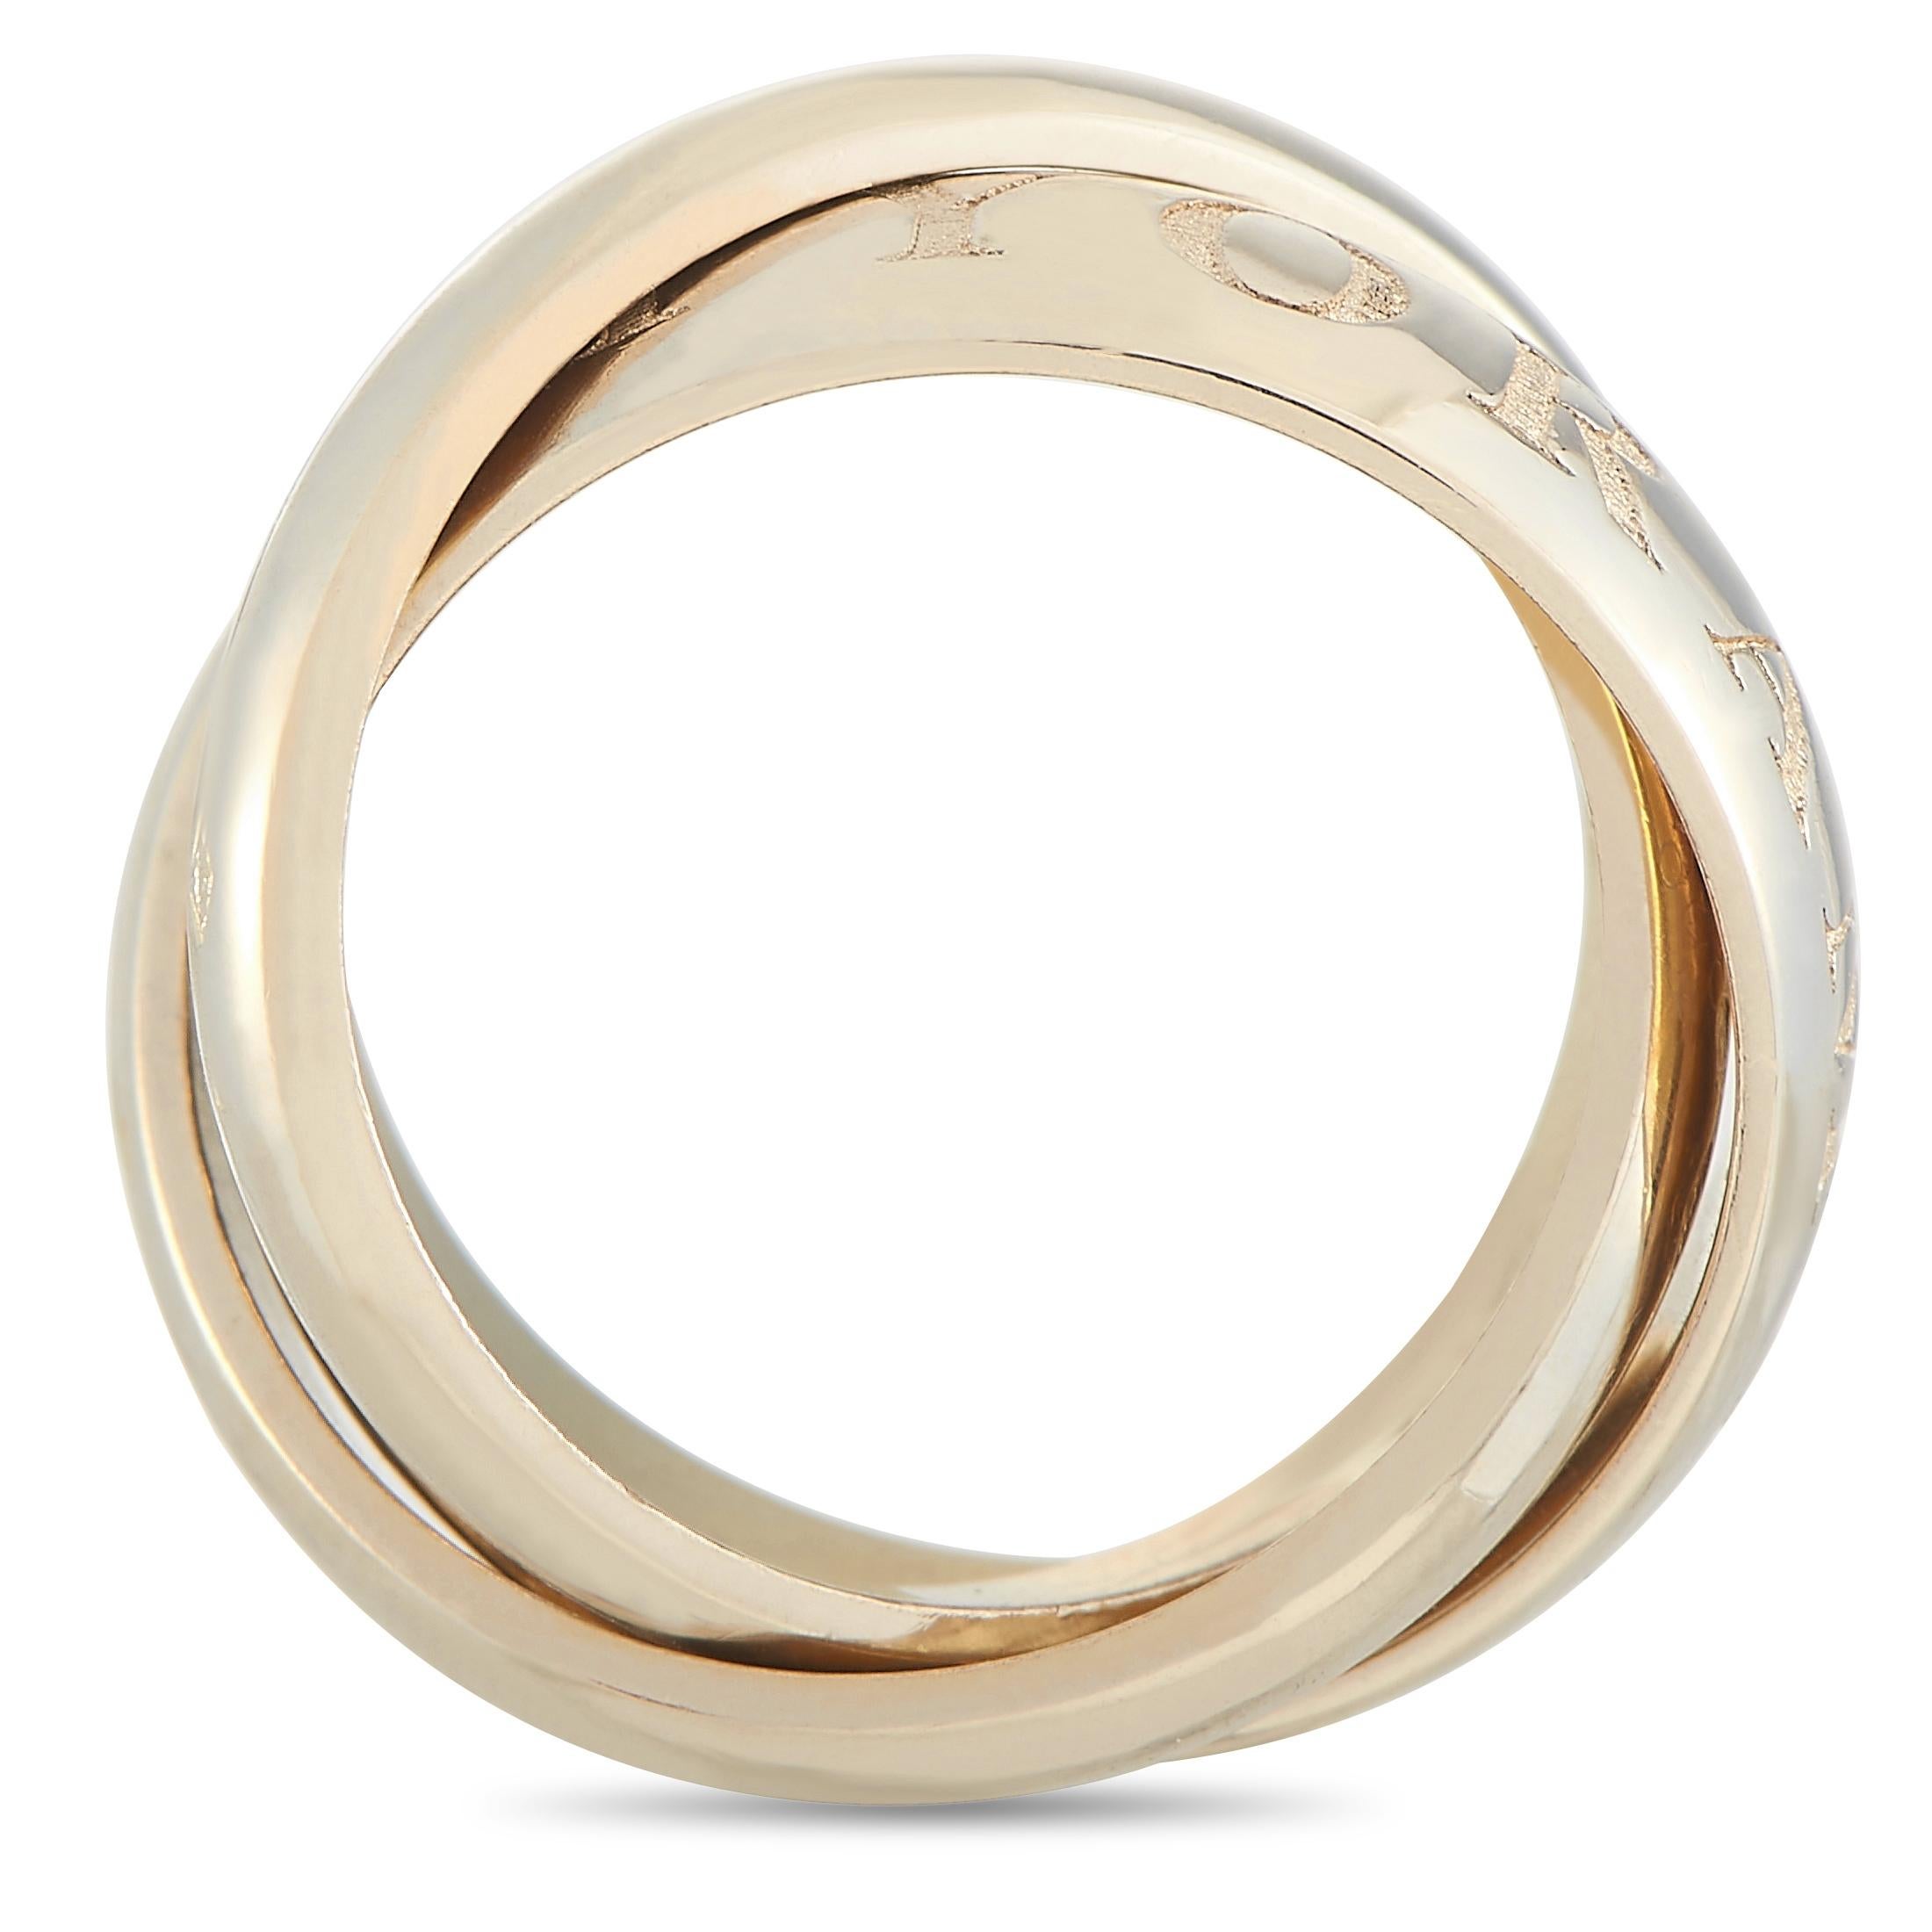 The Cartier “Trinity” ring is made of 18K yellow gold and weighs 10.6 grams, boasting band thickness of 10 mm.
 
 This item is offered in estate condition and includes a gift box.